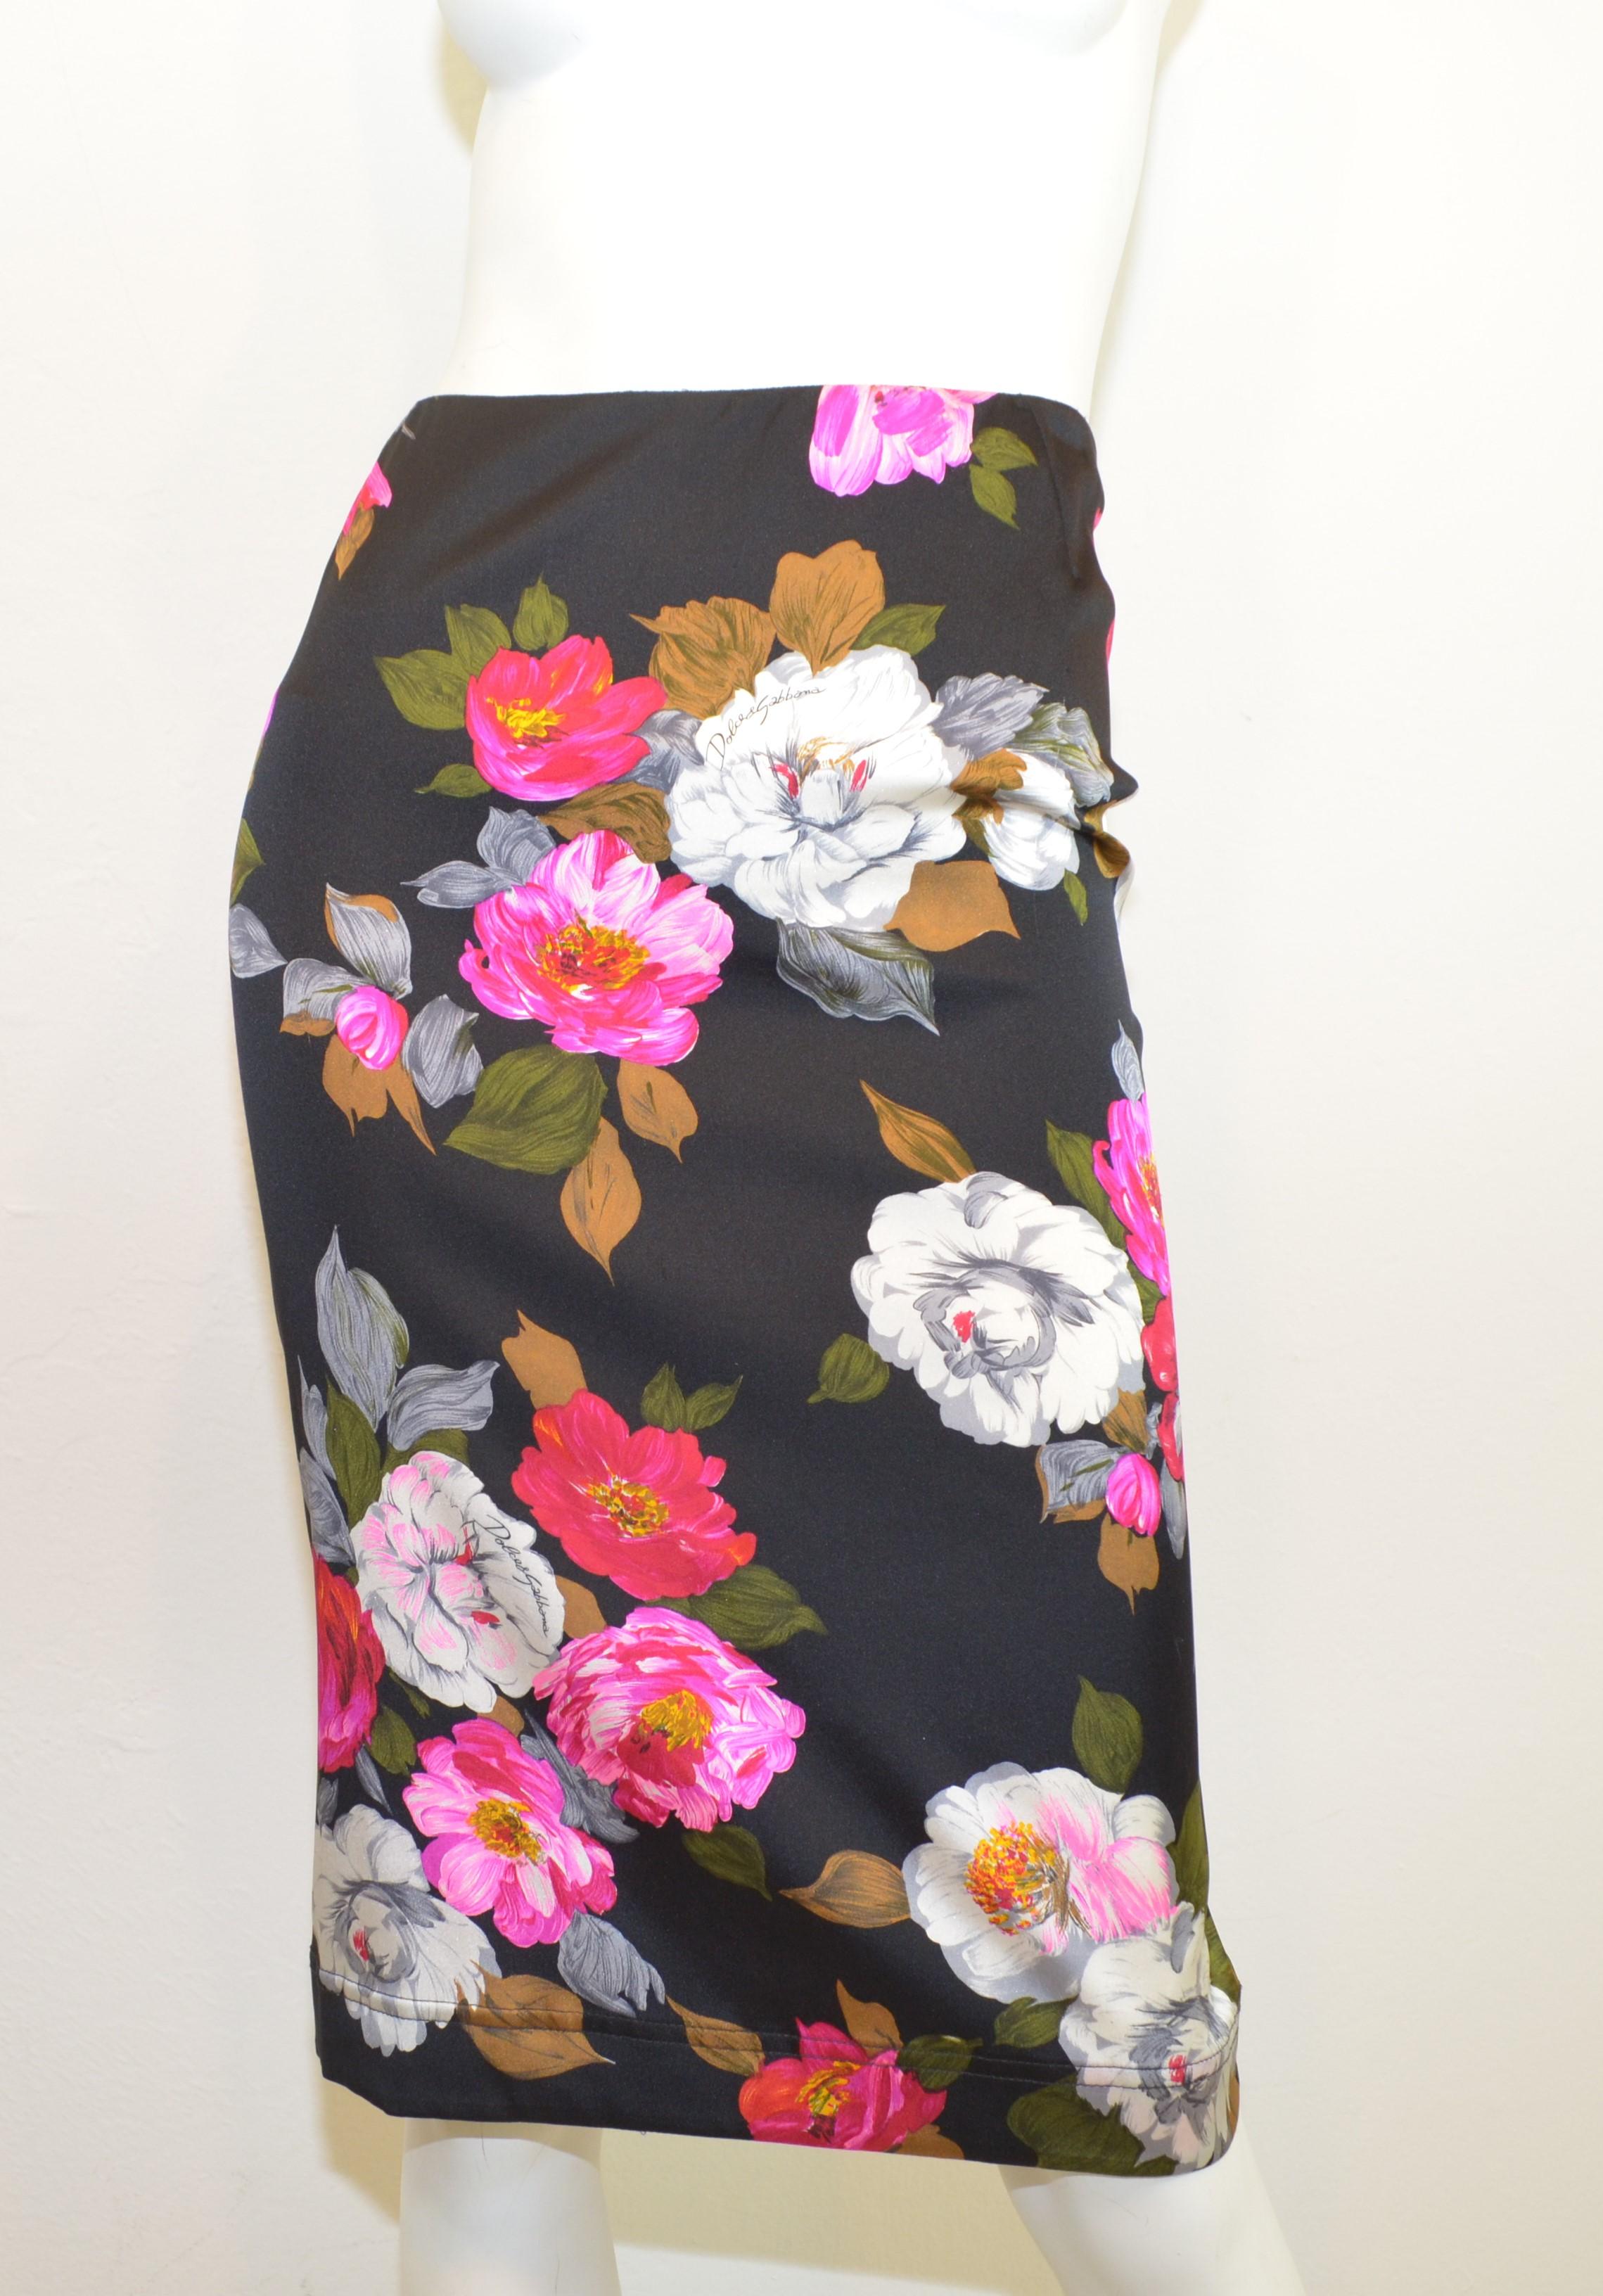 Dolce & Gabbana Silk Pencil Skirt w/Floral Print -- skirt features a multicolored floral print on a black background. Skirt has a back zipper and hook-and-eye fastening, size 46,  and composed with a silk and lycra blend.

Measurements:
waist